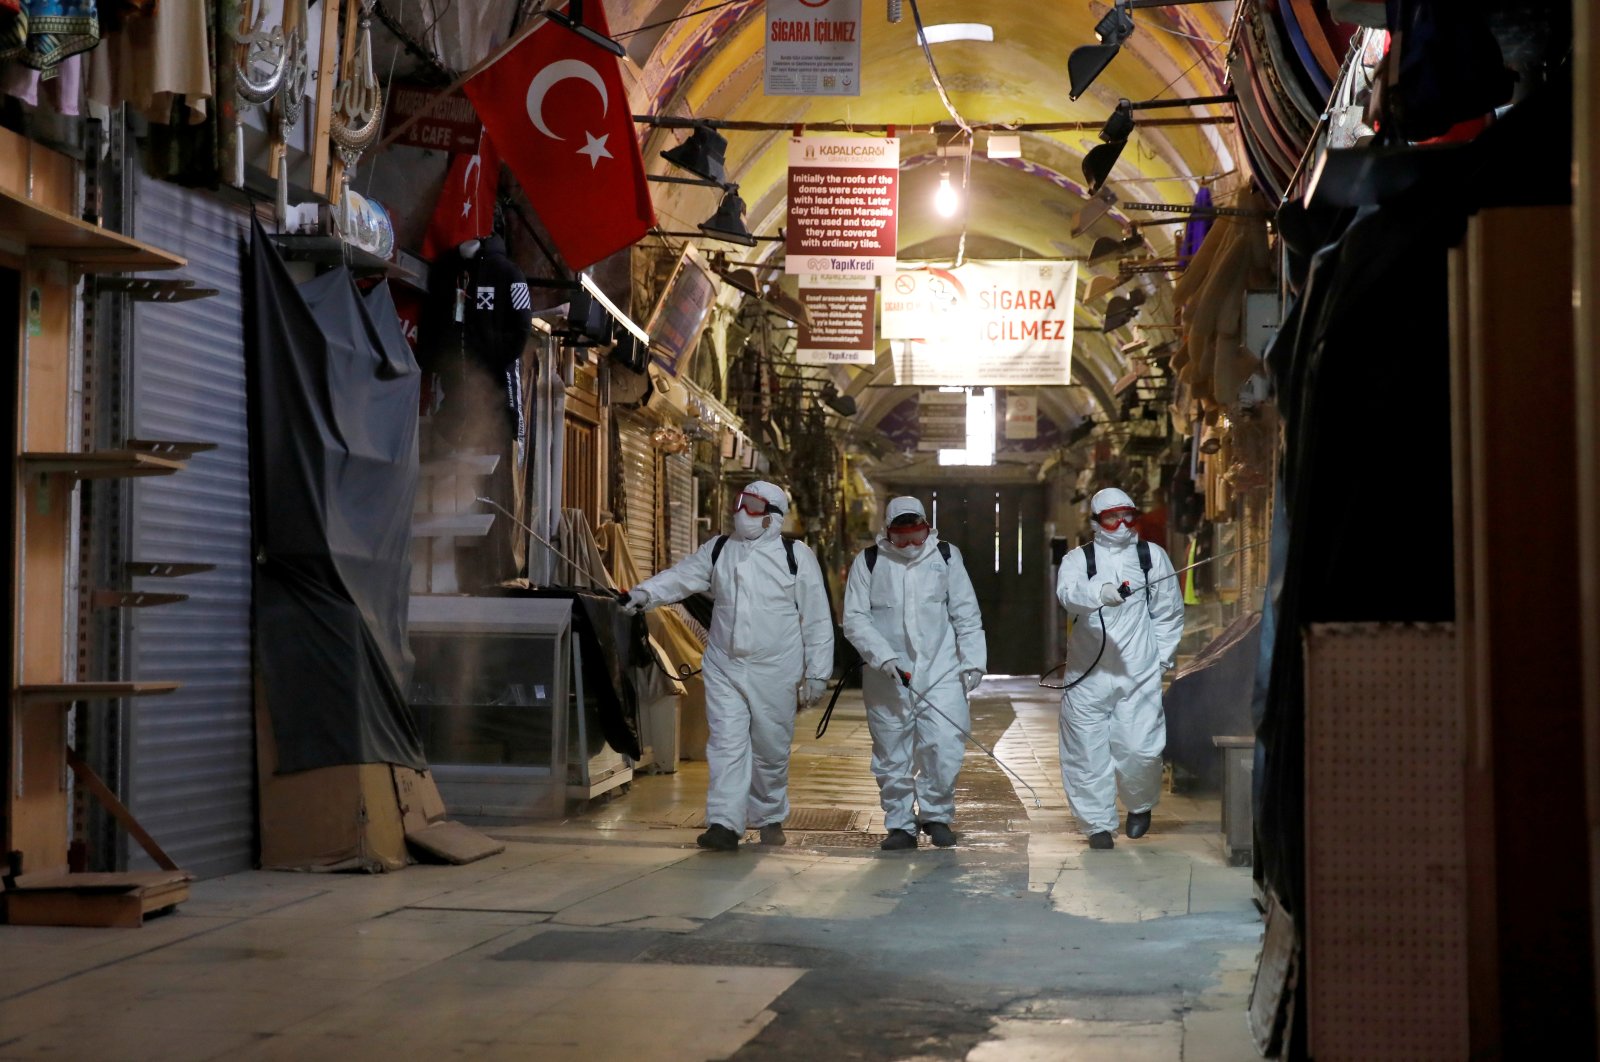 Workers in protective suits spray disinfectant at the Grand Bazaar to prevent the spread of the coronavirus disease (COVID-19), Istanbul, Turkey, Wednesday, March 25, 2020. (Reuters Photo)